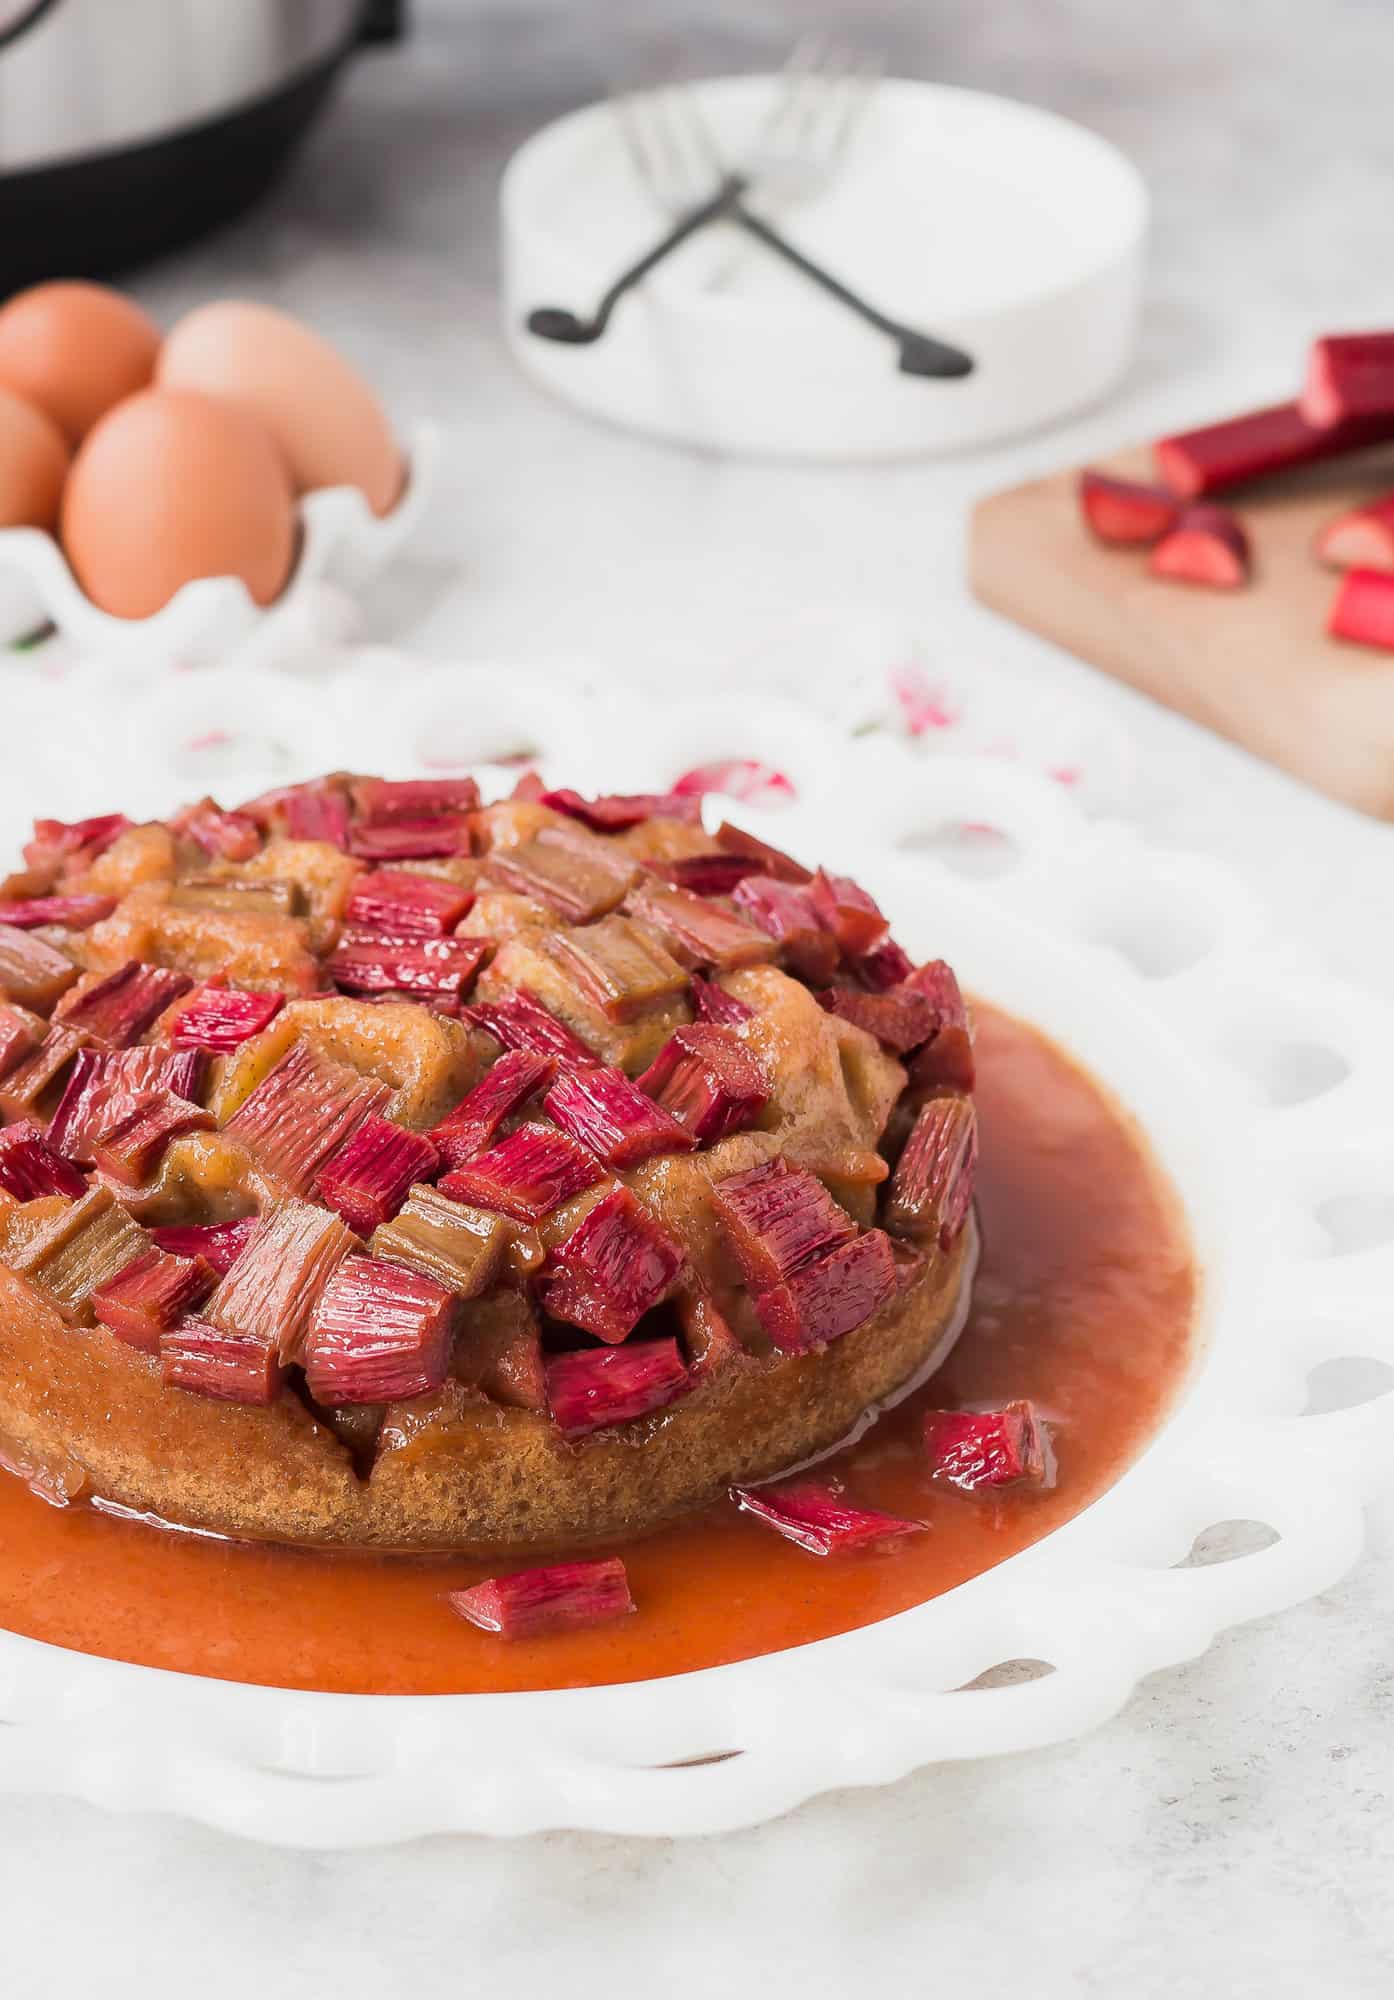 Rhubarb cake in front of eggs, rhubarb, and an Instant Pot.